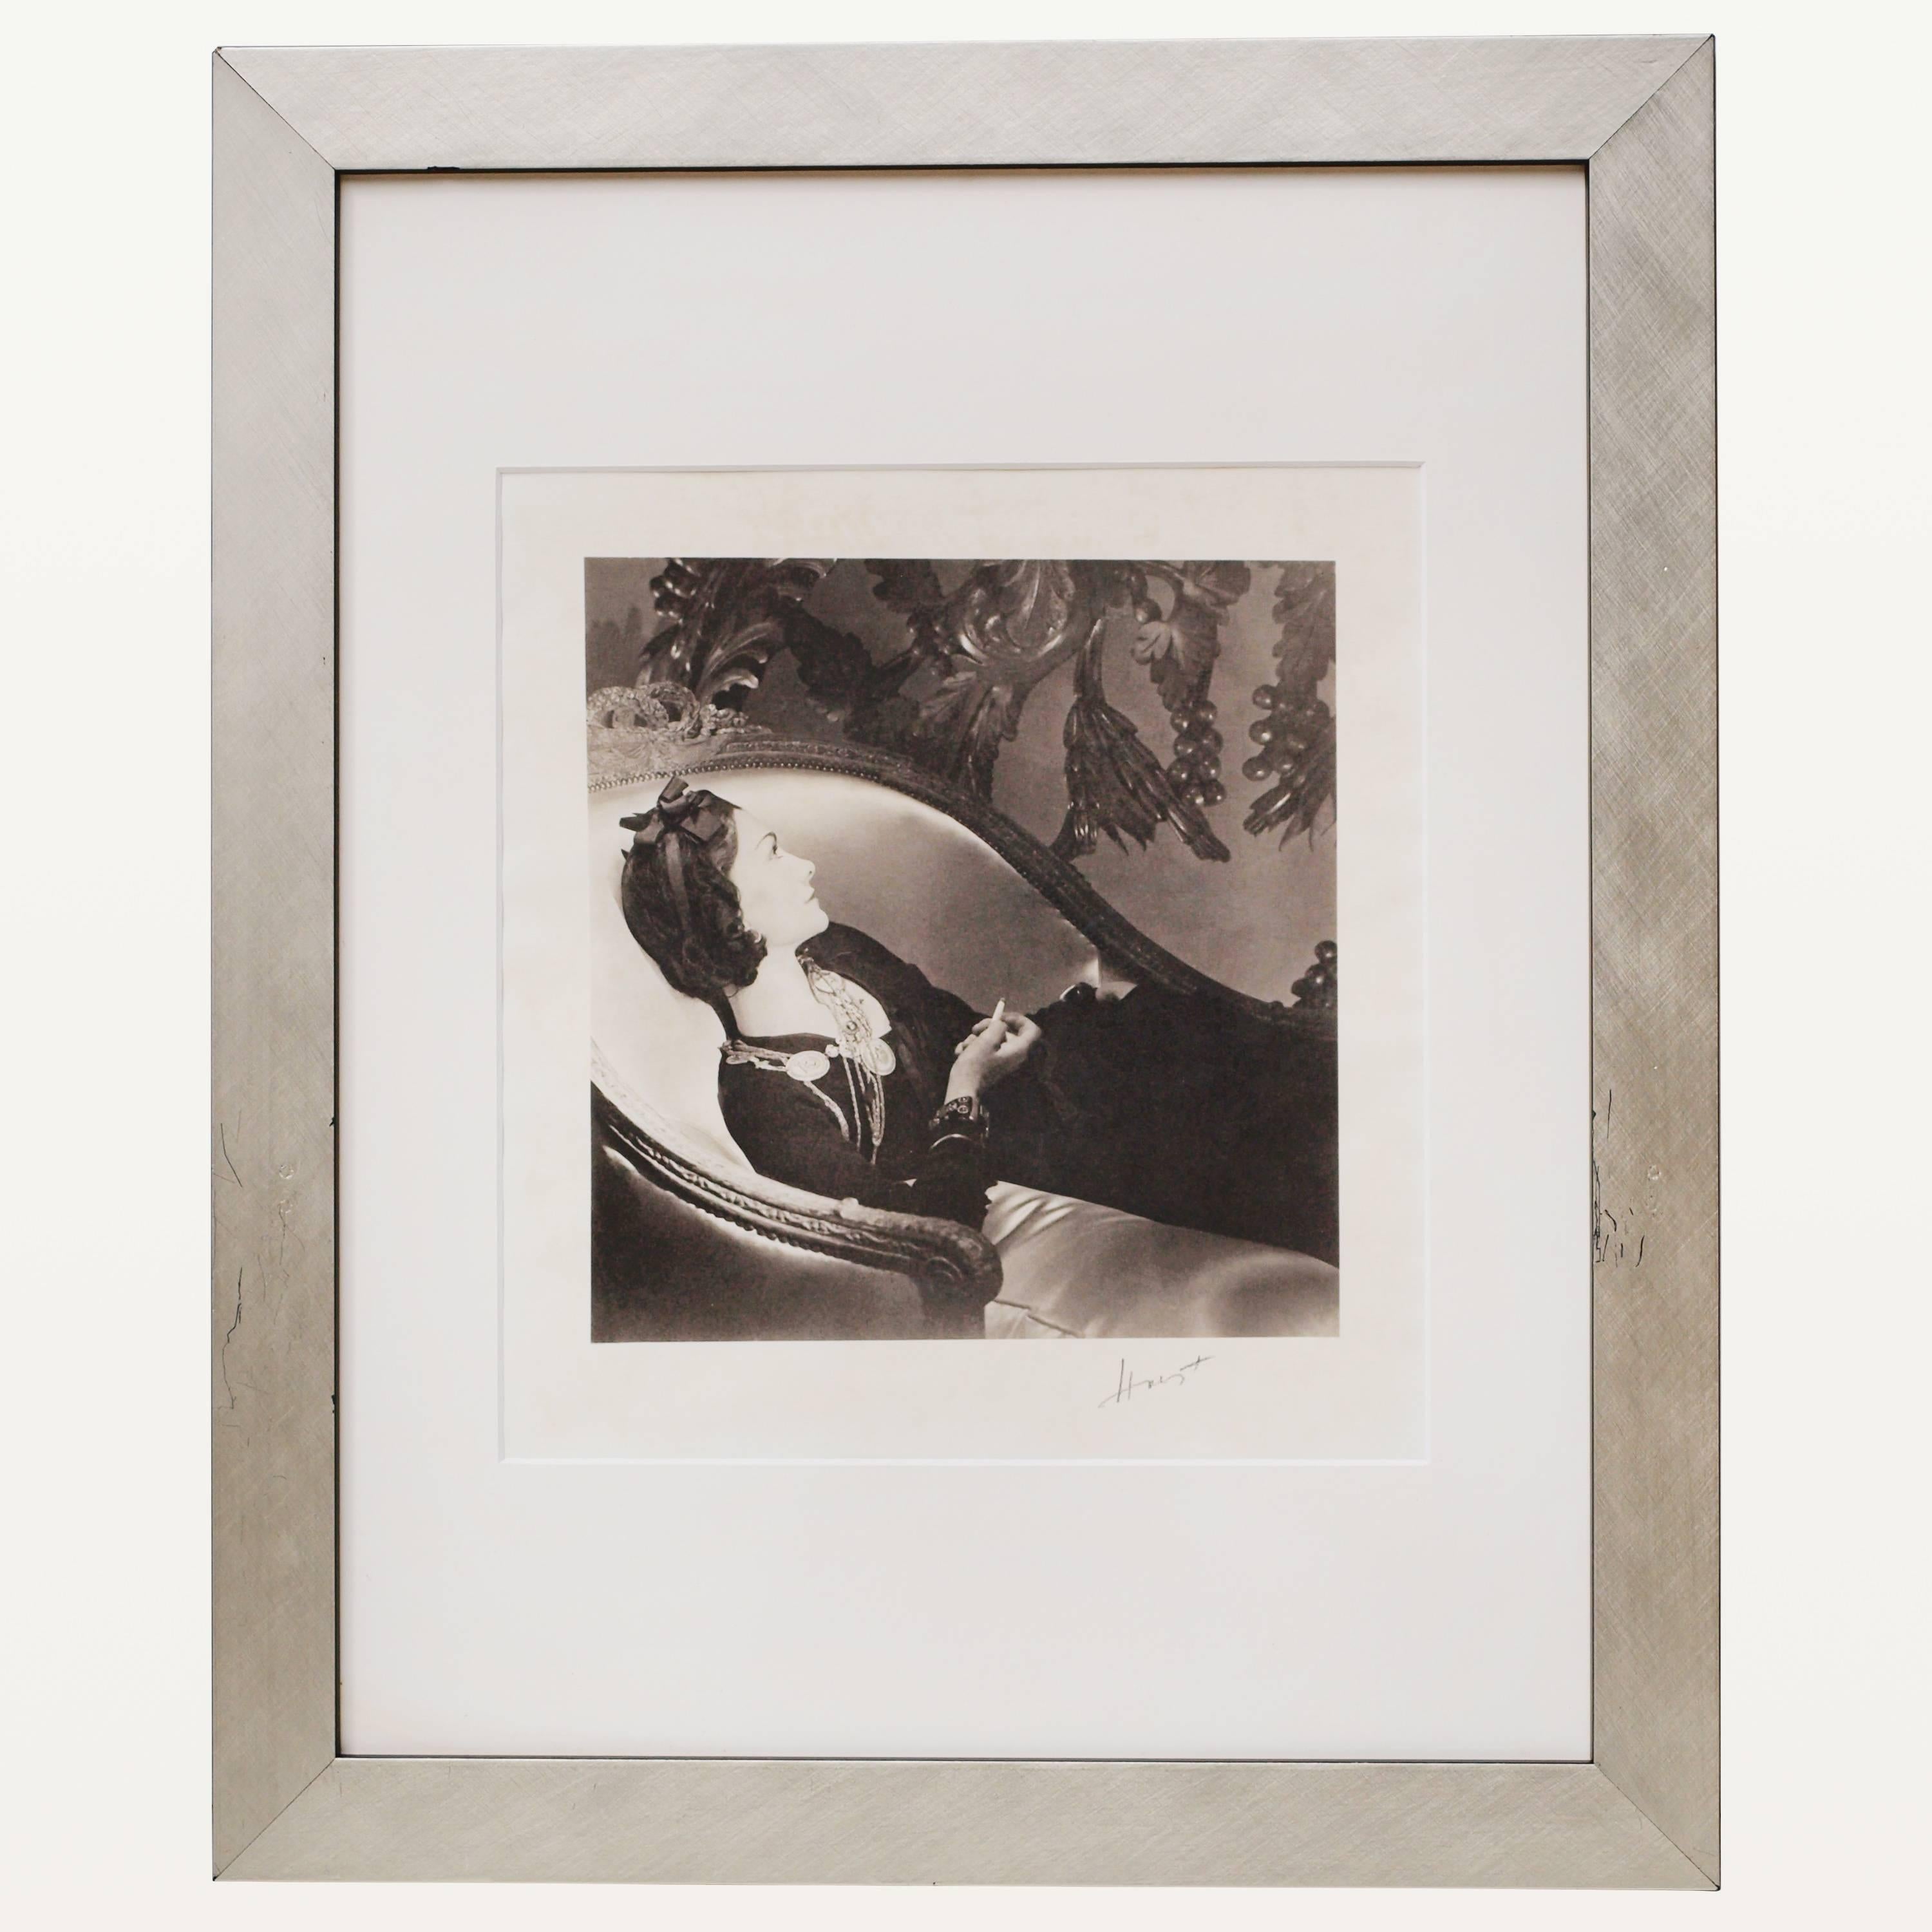 Title: Gabrielle coco chanel
Print: Platinum palladium print, printed on Strathmore cotton paper
Date: 1937, printed later
Signature: Signed Horst in Pencil on Recto and Vesrso

This portrait was created when chanel was at the height of her